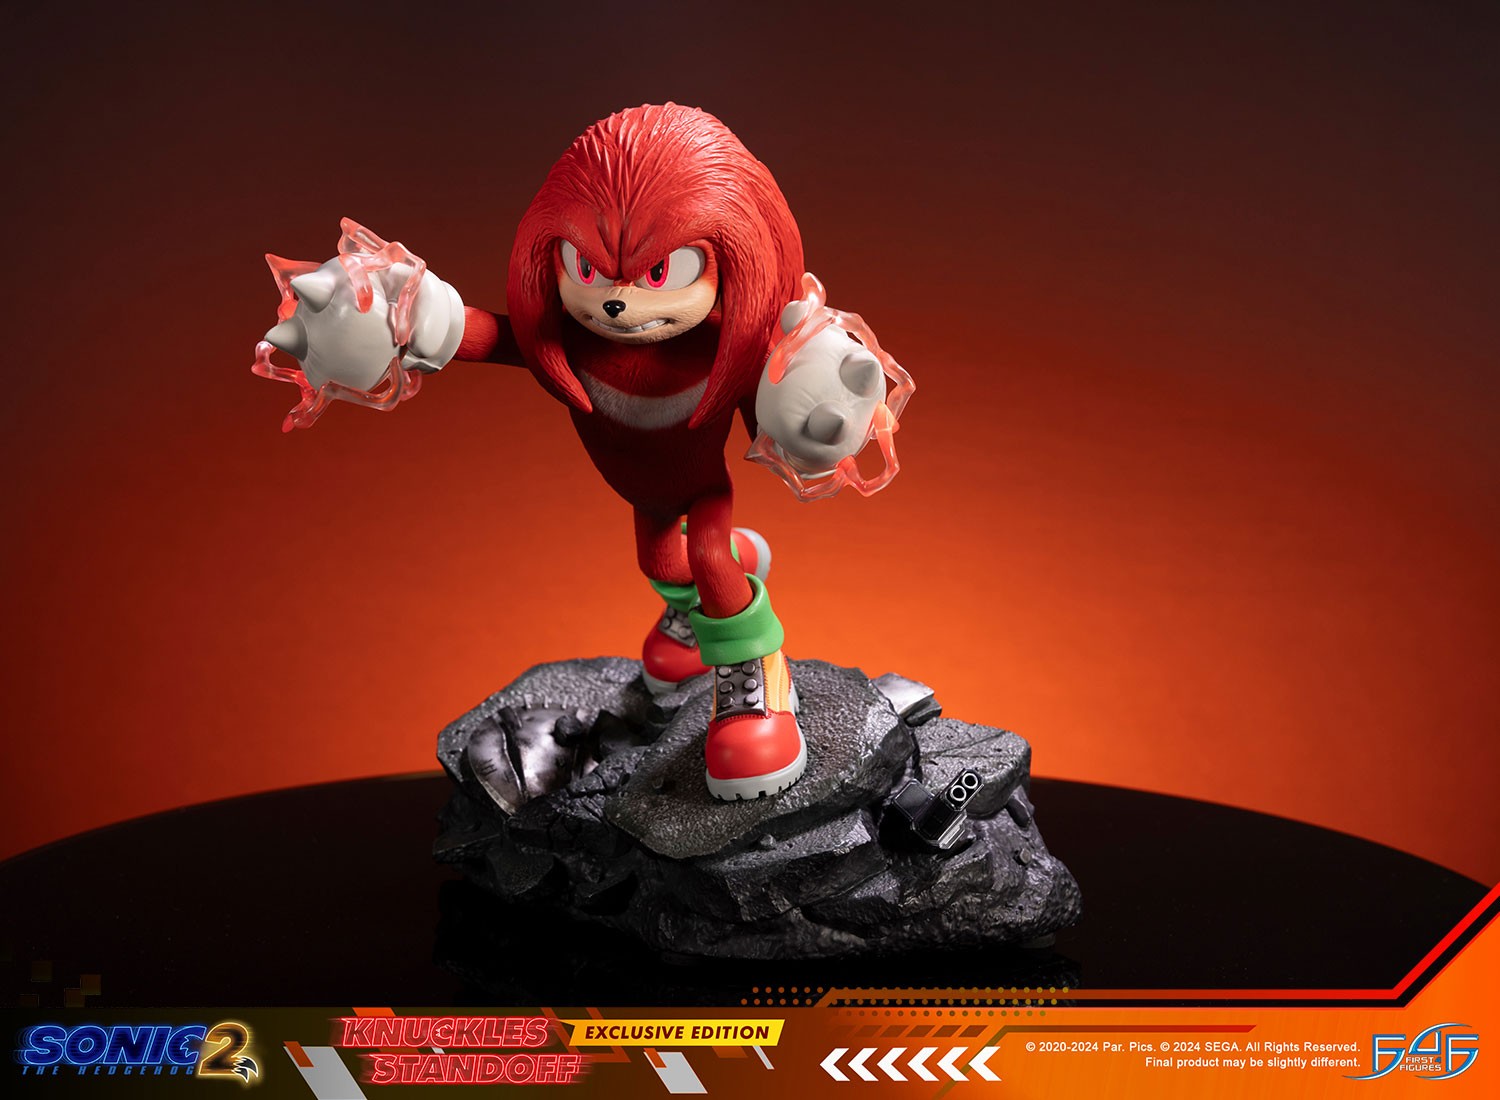 Sonic the Hedgehog 2 - Knuckles Standoff (Exclusive Edition)